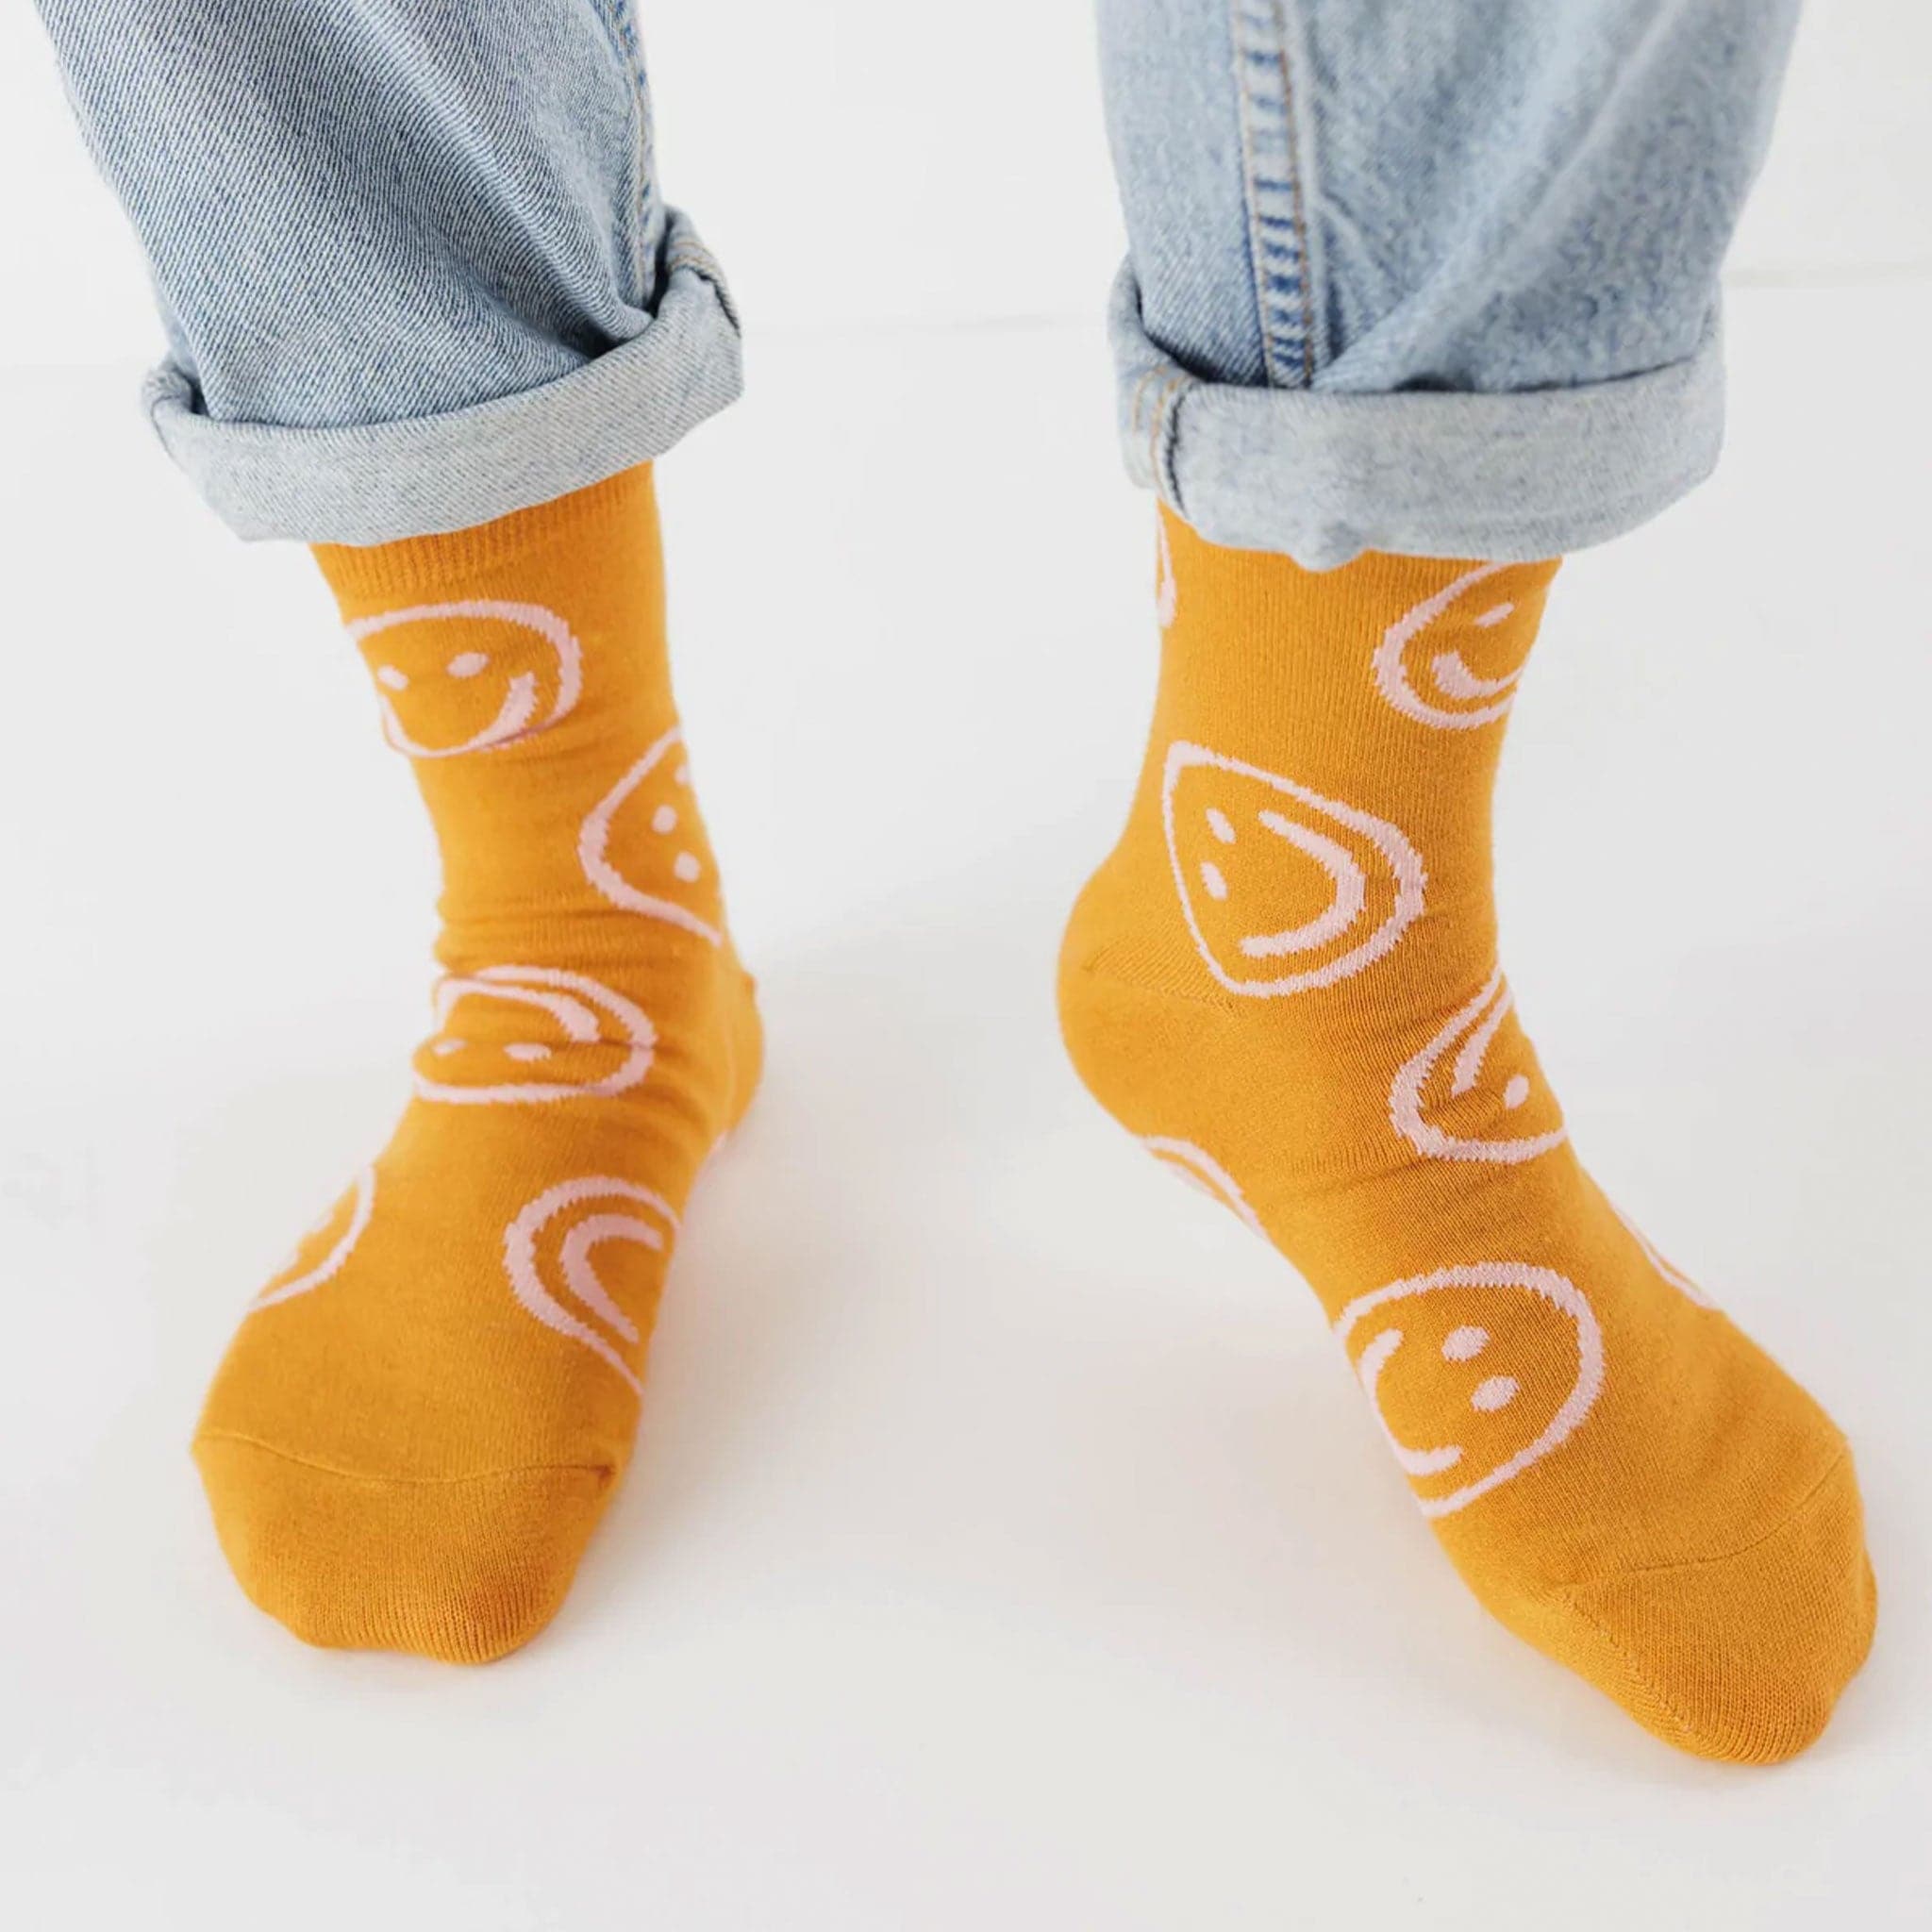 A yellow pair of socks with smiley face designs.